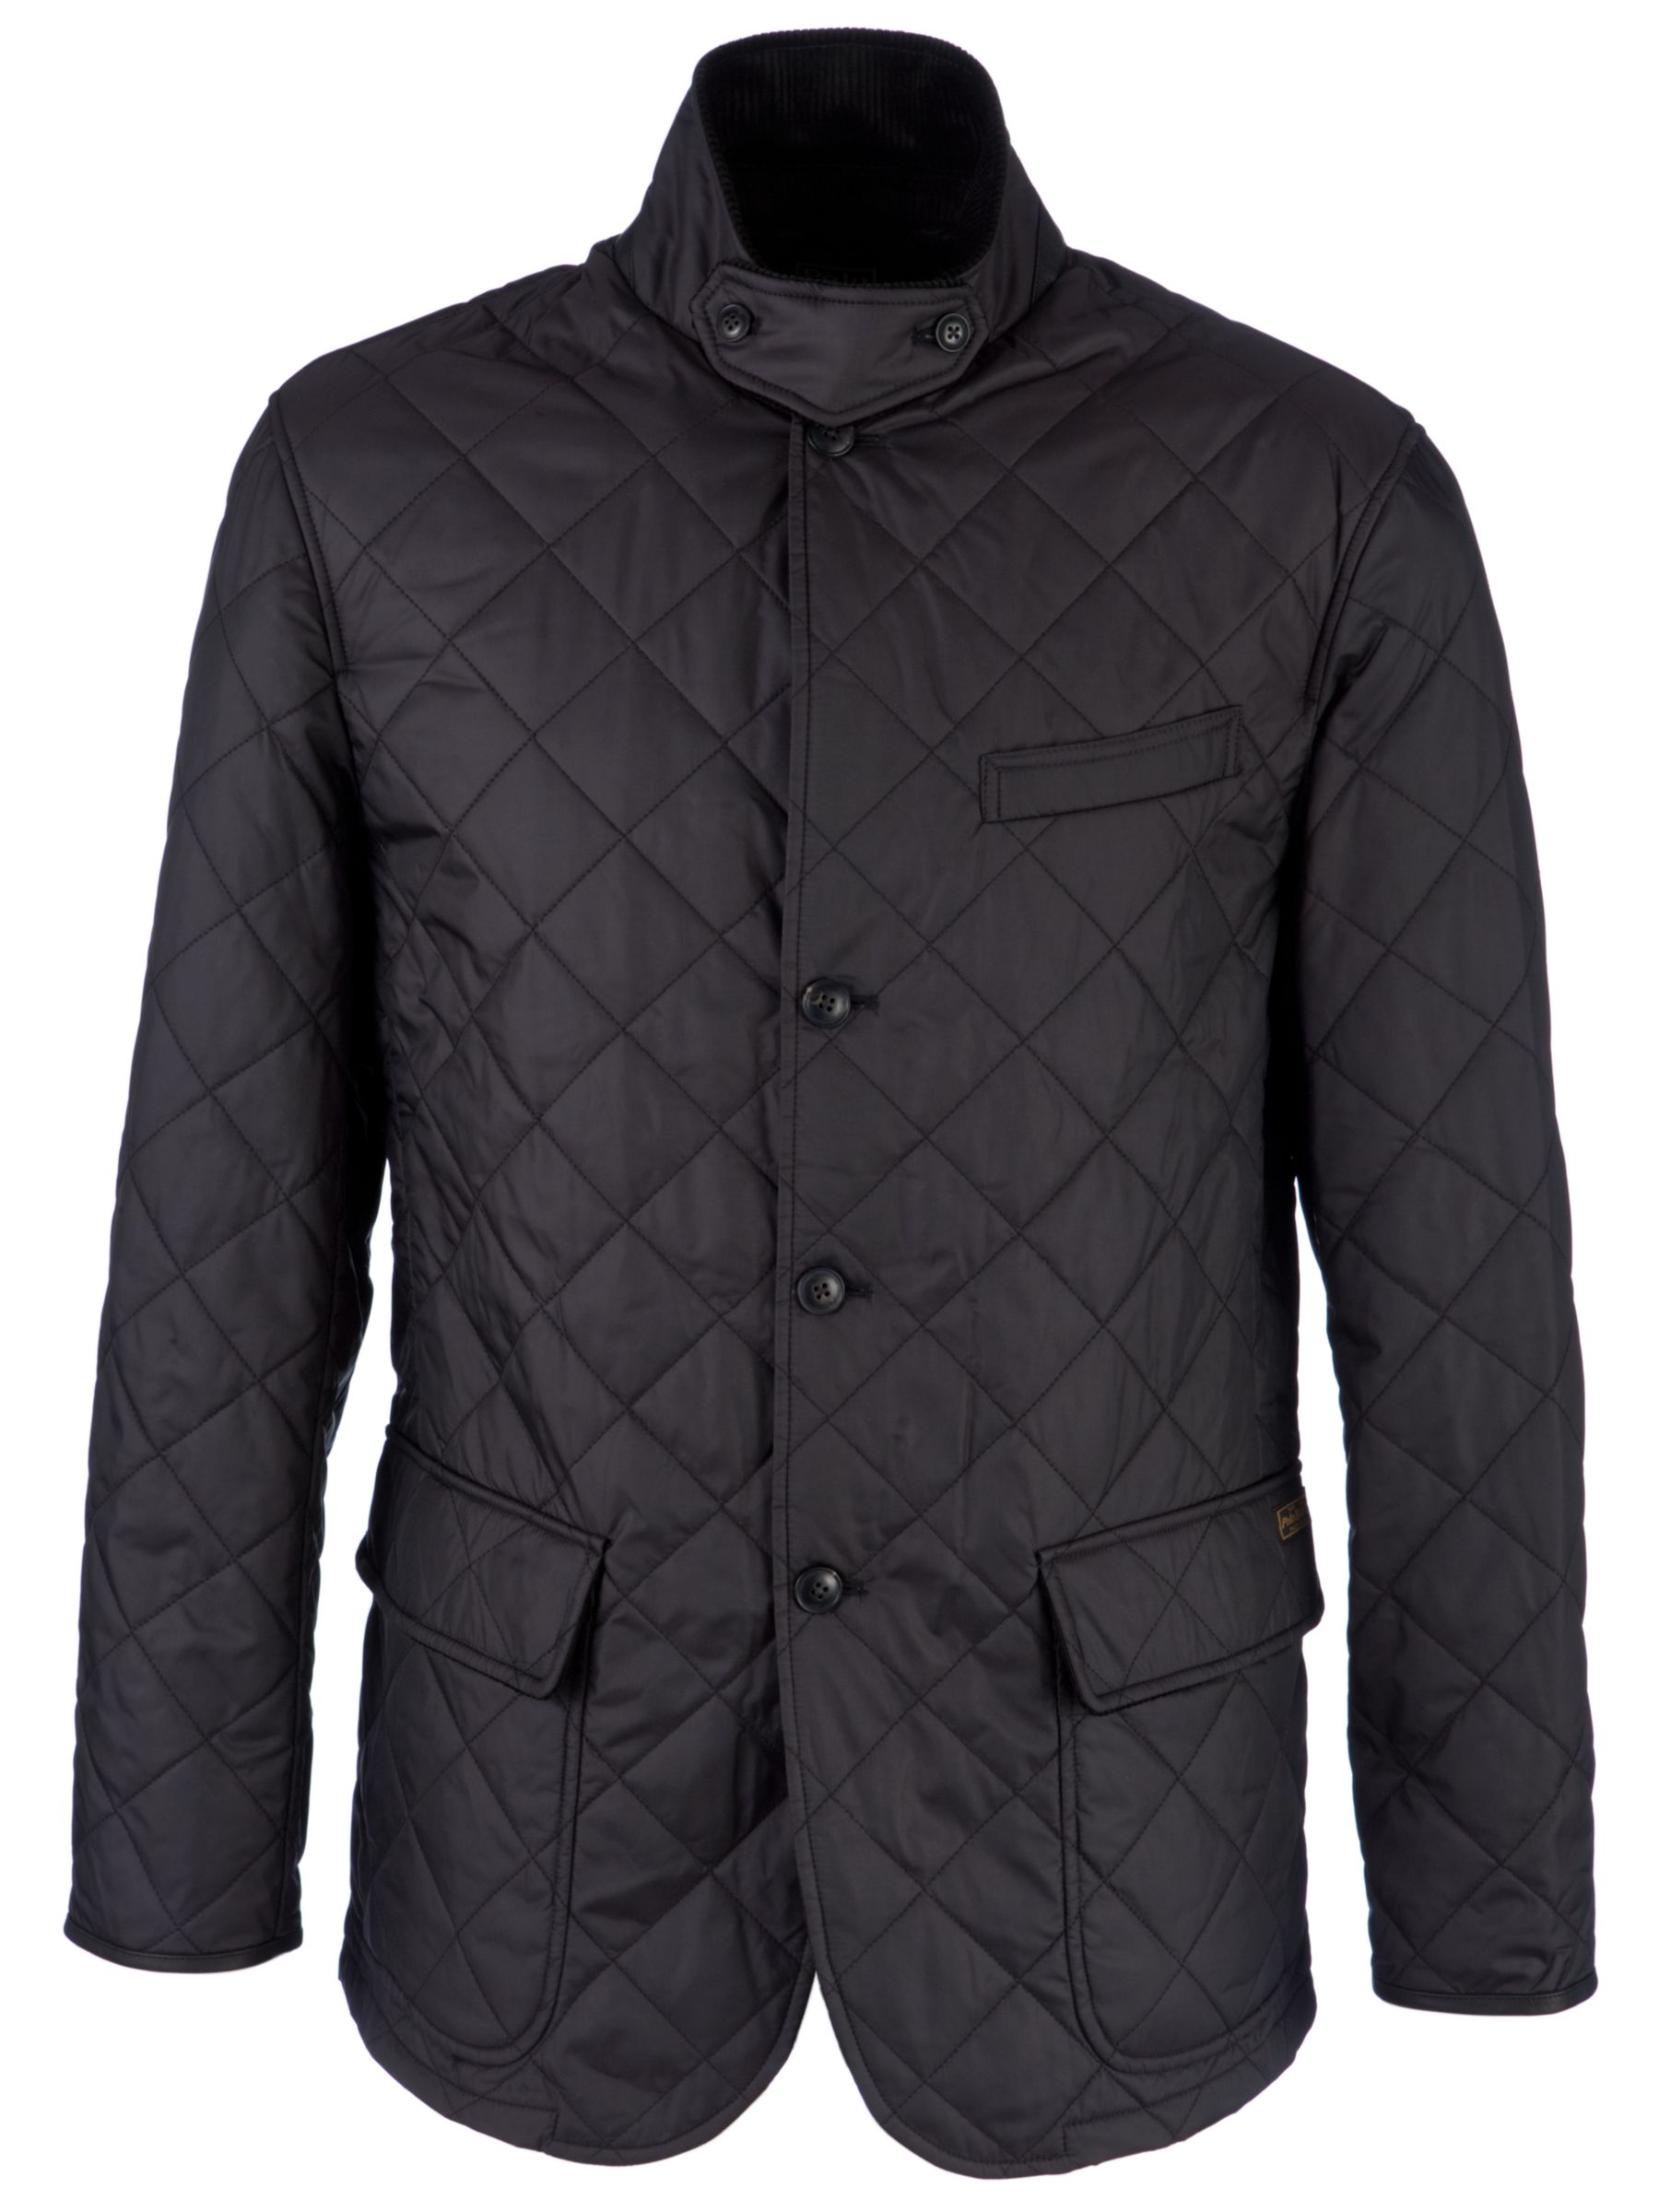 Polo Ralph Lauren Quilted Sportcoat, Black at John Lewis